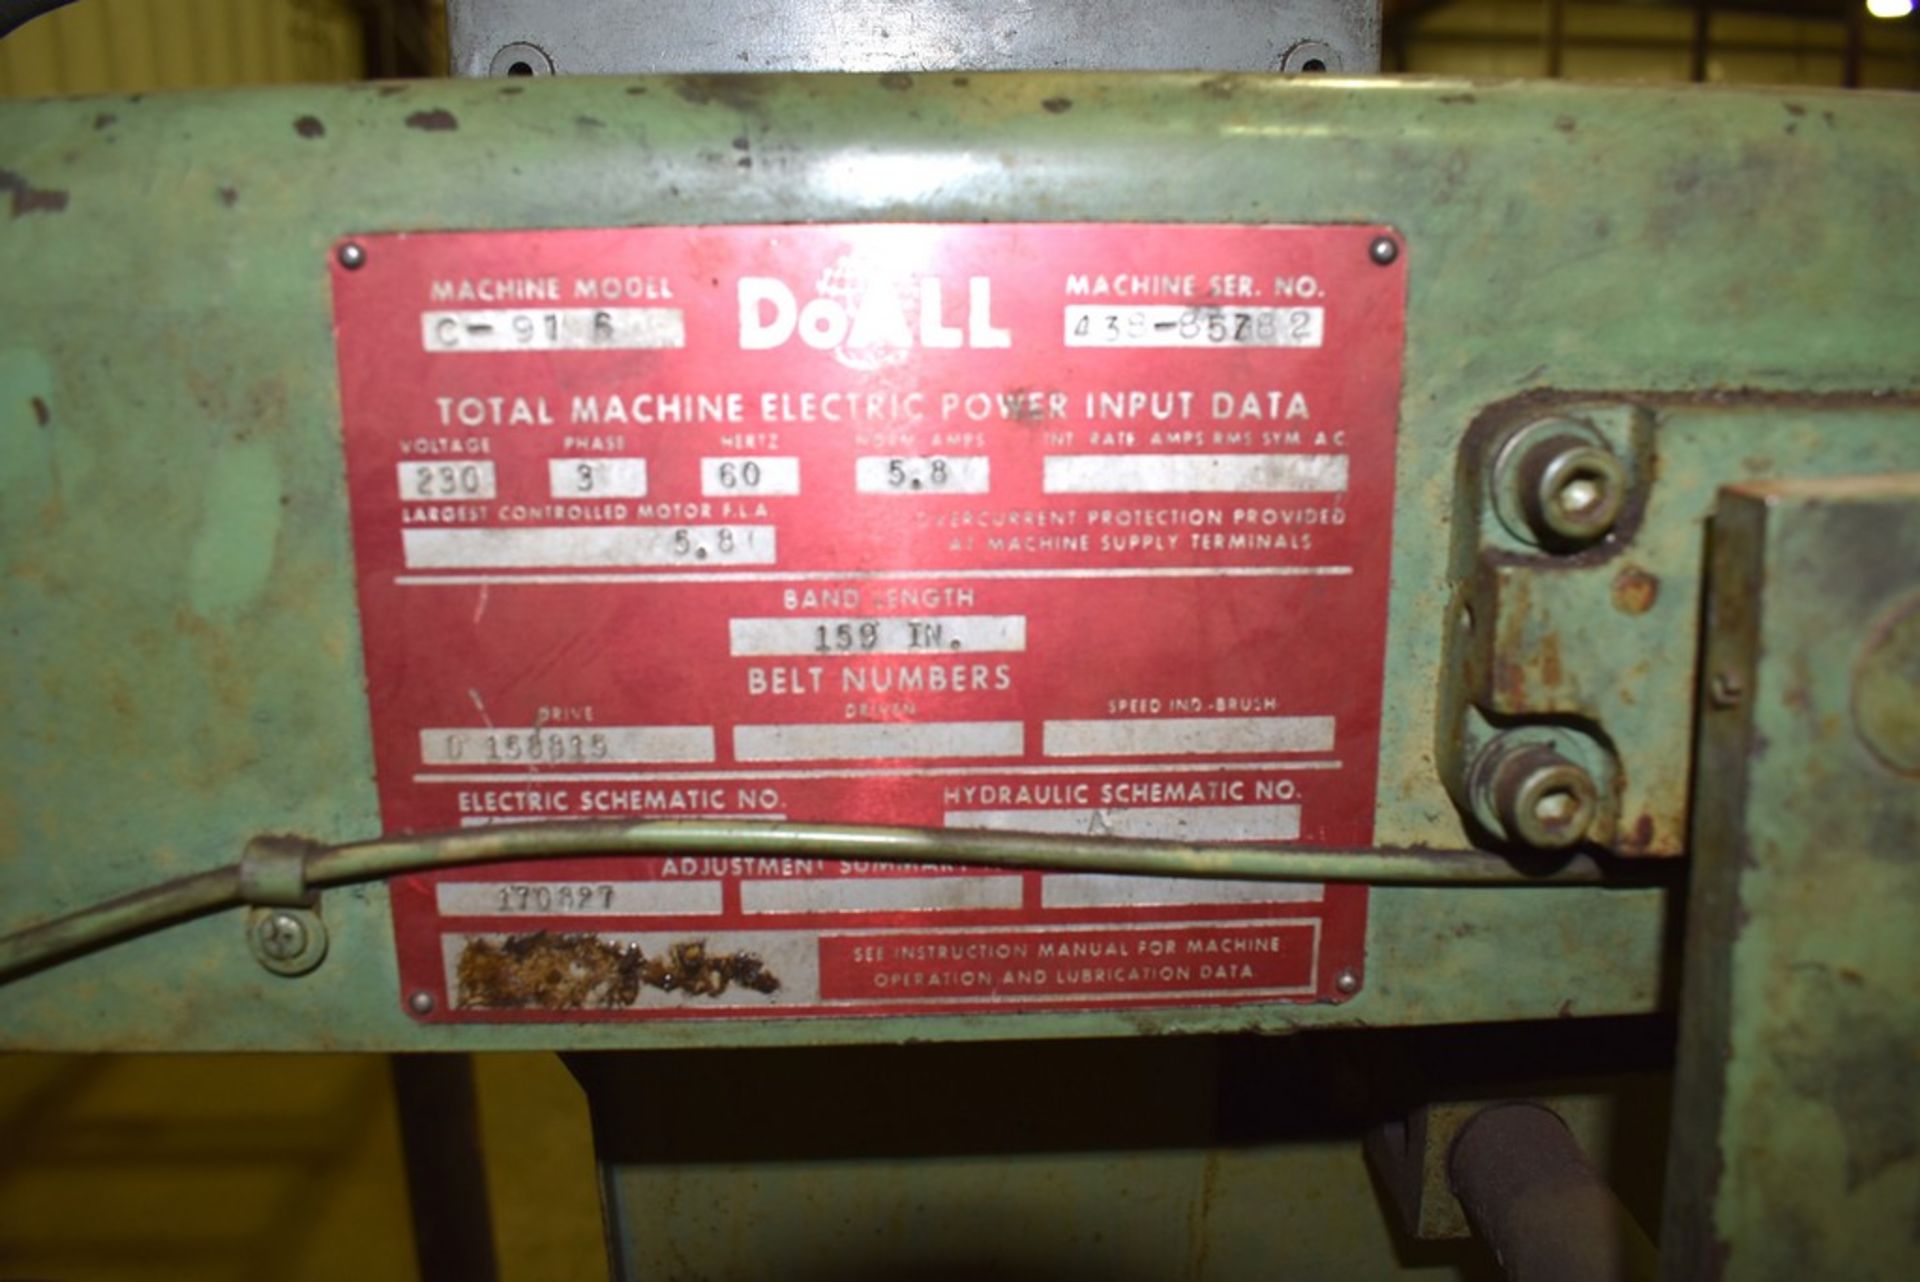 Do All Model C-916 Horizontal Bandsaw, Serial Number: 438-85782 ( New 1985), 9" x 16" Capacity - ( - Image 2 of 9